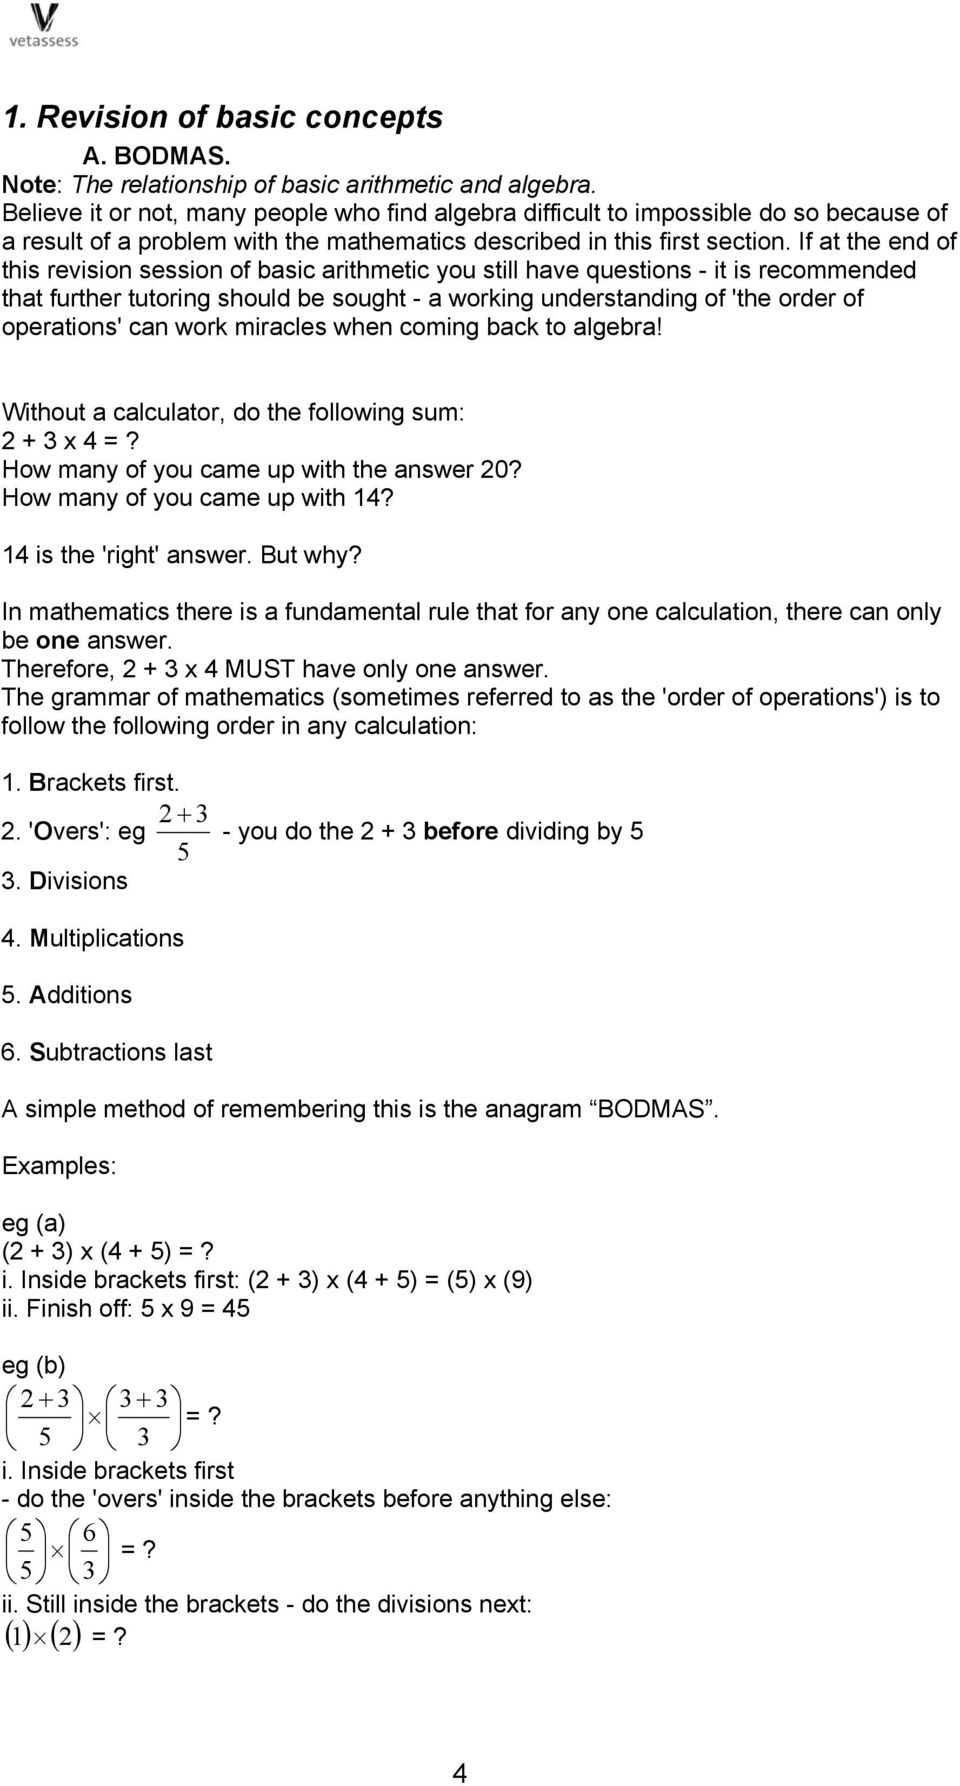 If at the end of this revision session of basic arithmetic you still have questions - it is recommended that further tutoring should be sought - a working understanding of 'the order of operations'